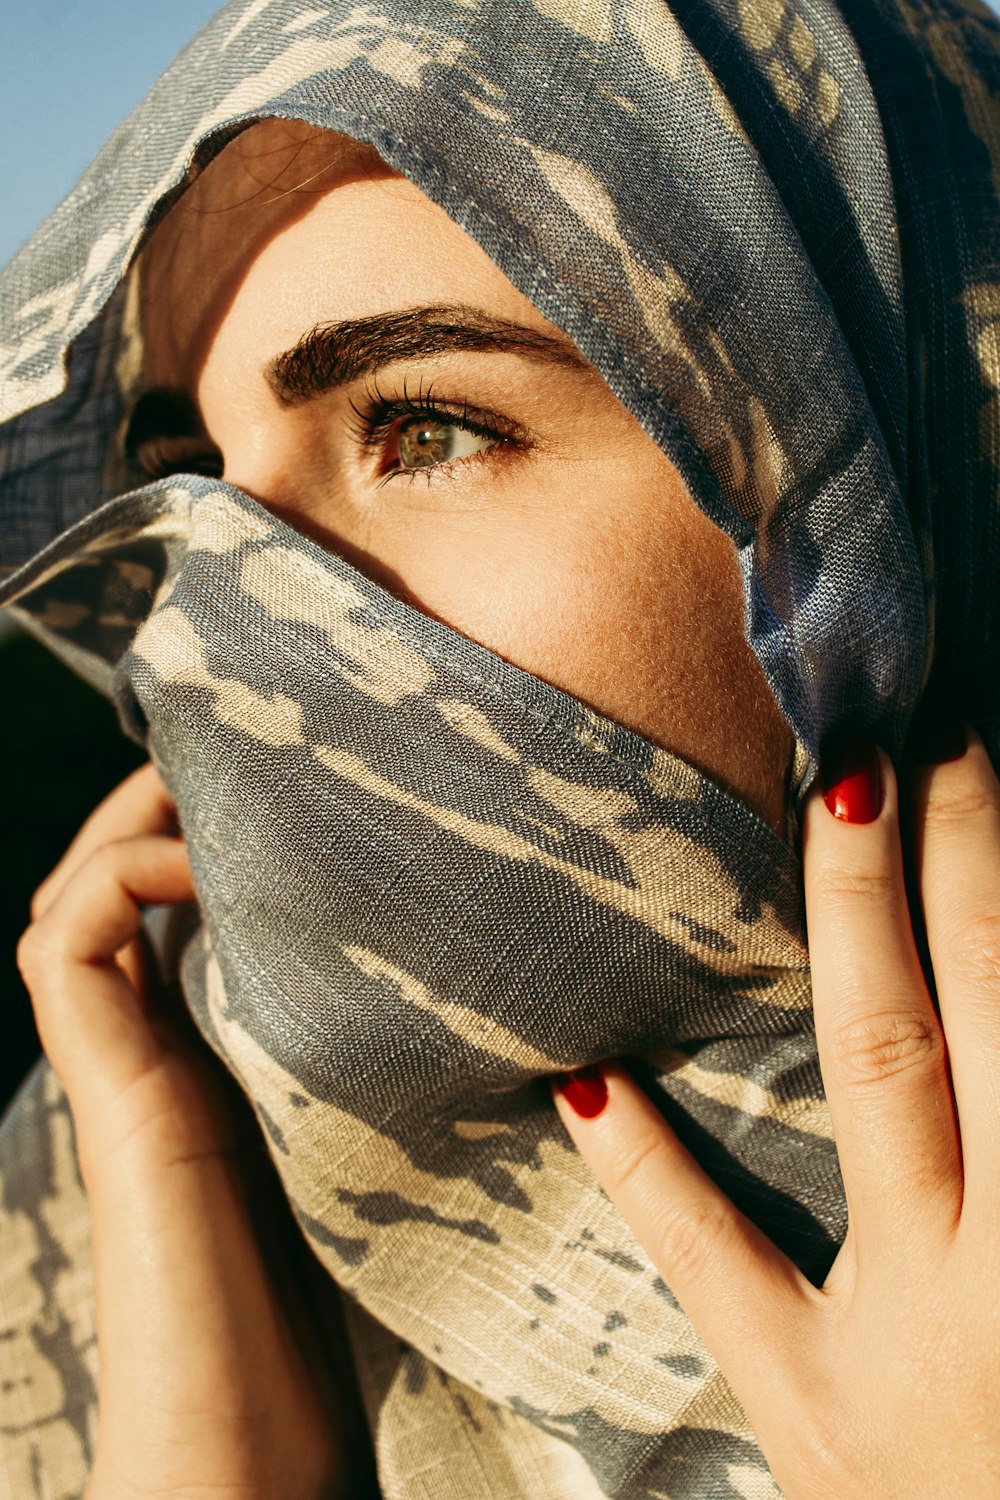 woman covering her face with gray and black camouflage textile